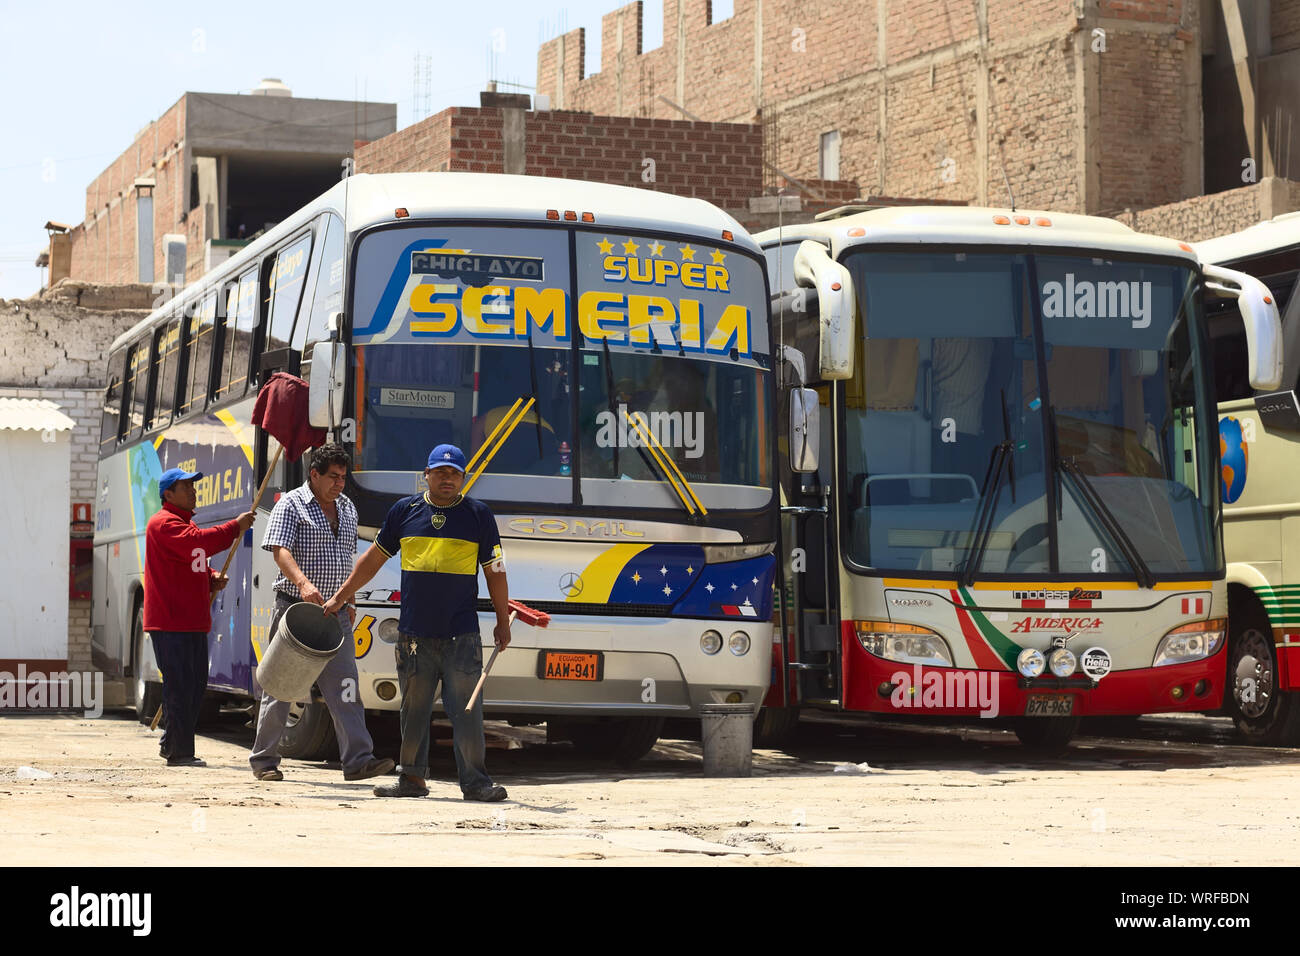 CHICLAYO, PERU - AUGUST 16, 2013: Unidentified people cleaning  a long-distance bus at a bus terminal on August 16, 2013 in Chiclayo, Peru. Stock Photo